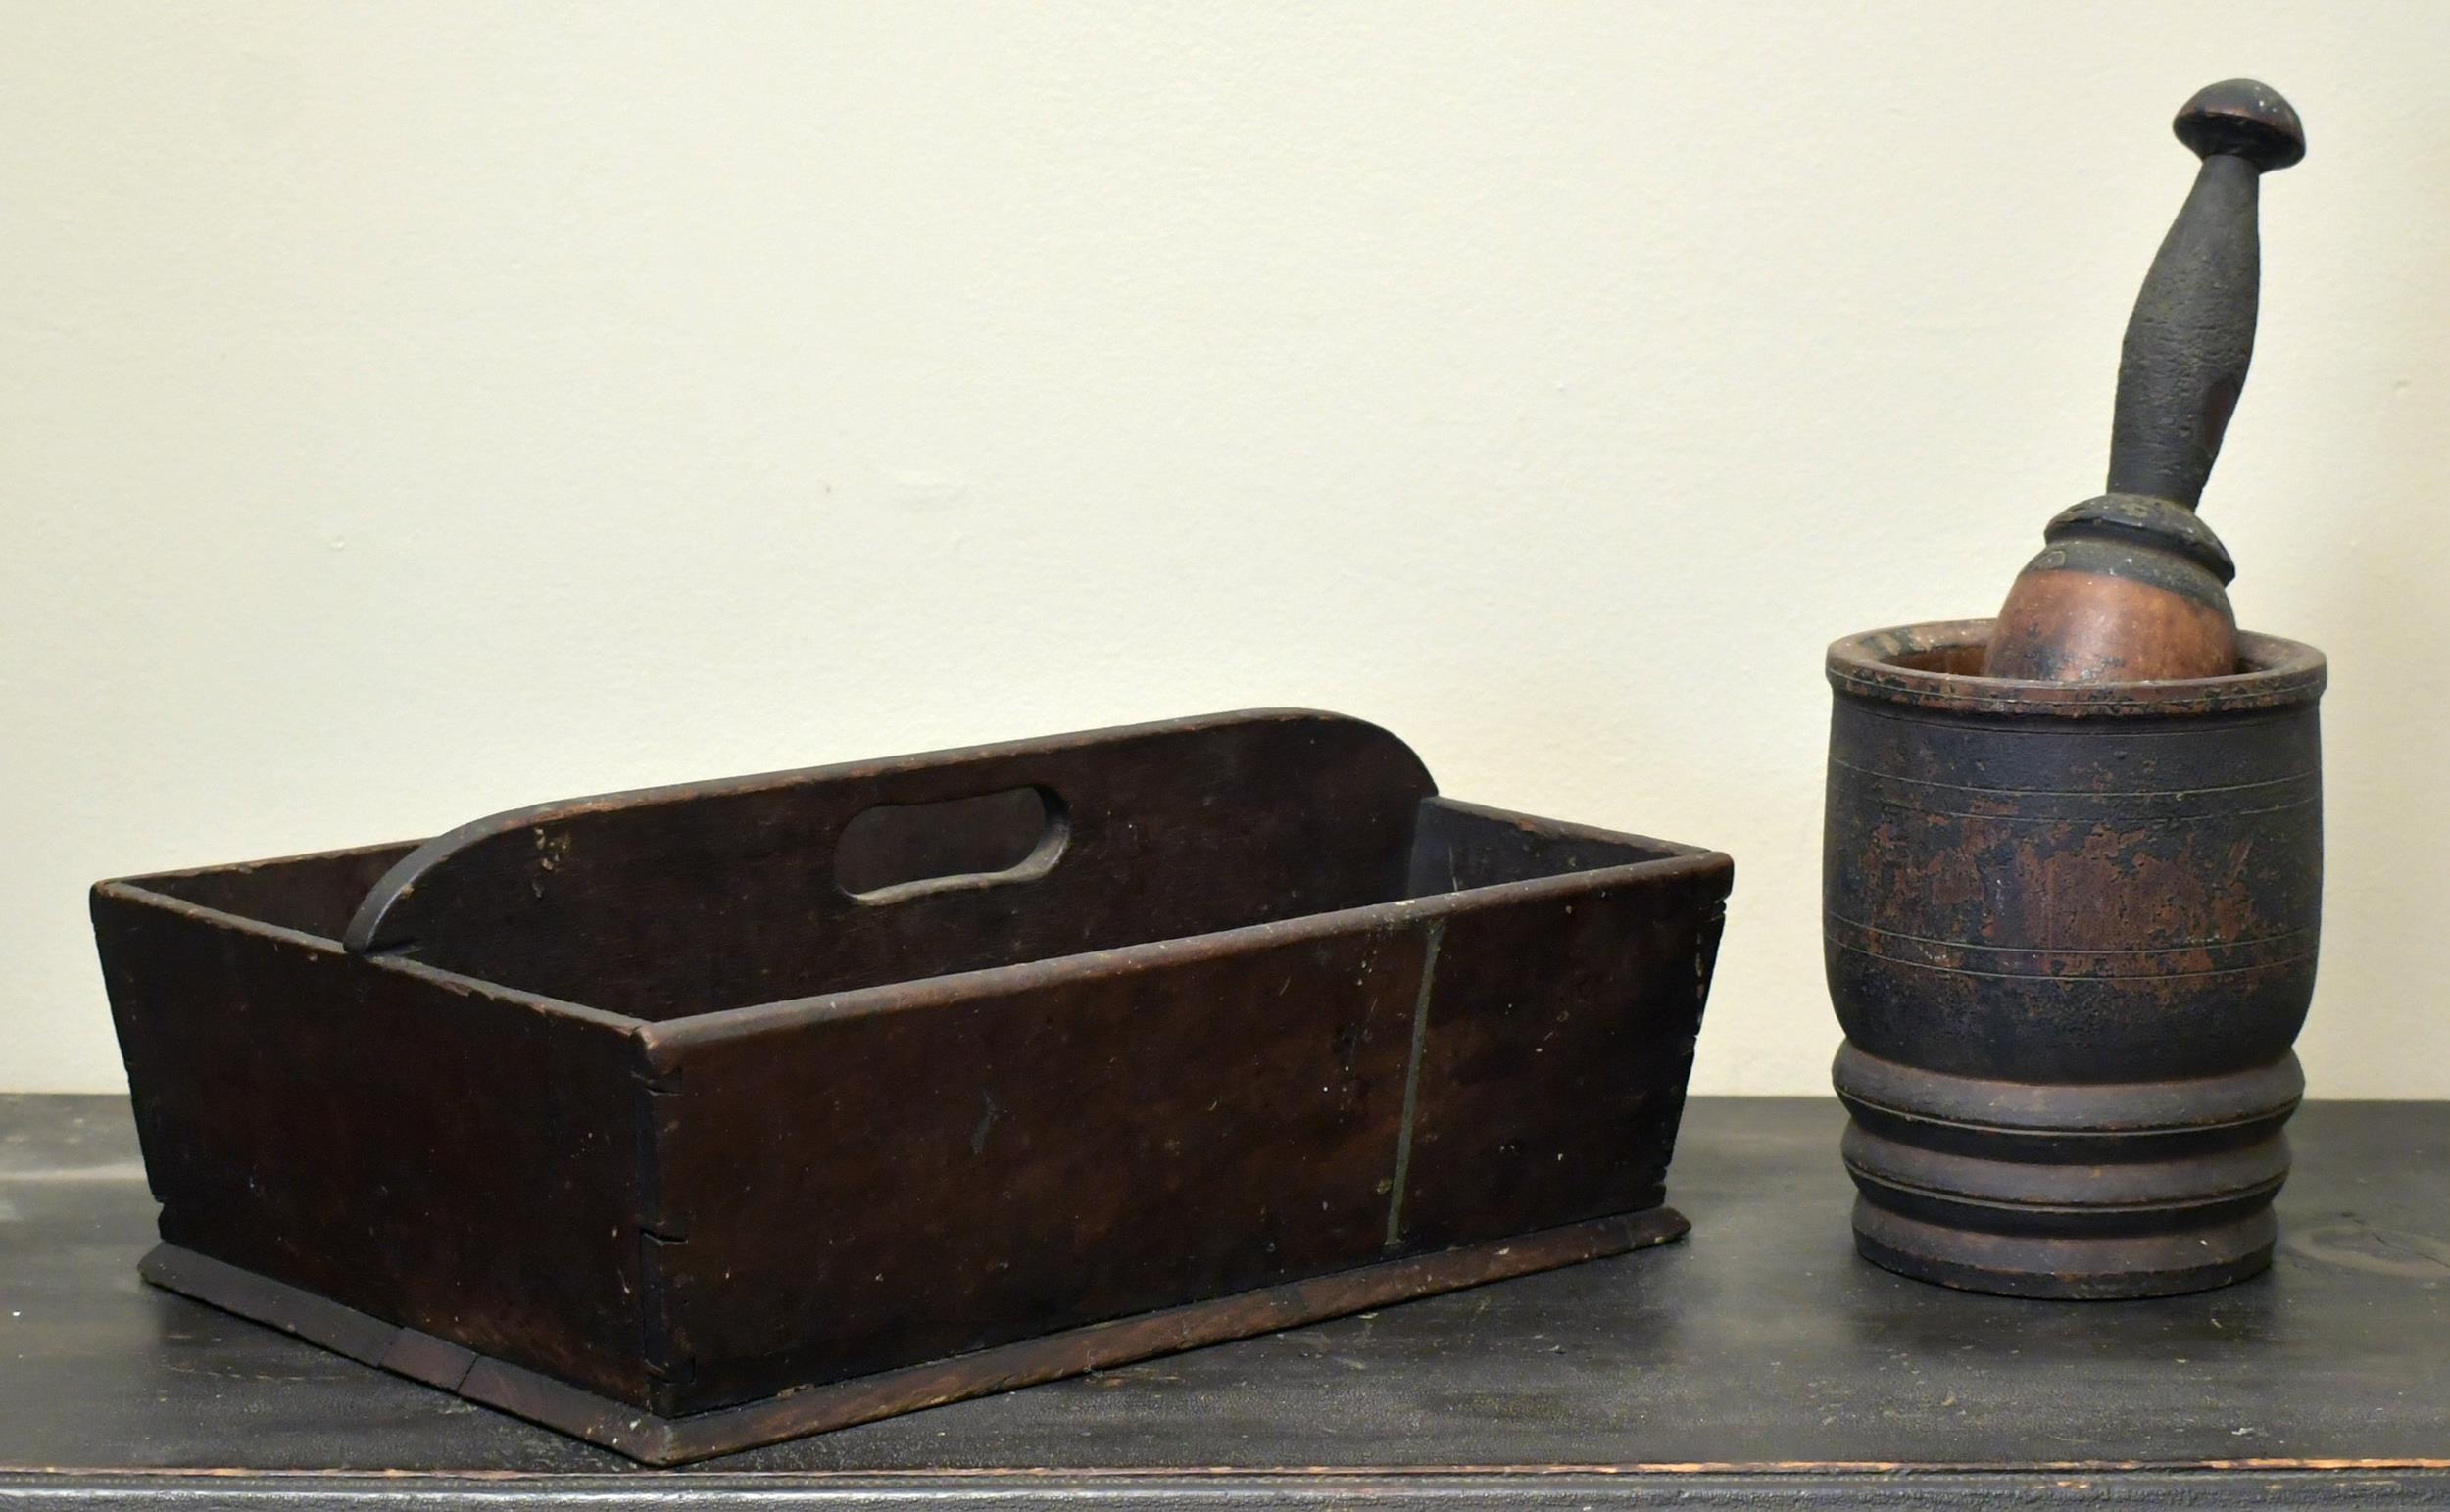 ANTIQUE CUTLERY TRAY AND MORTAR